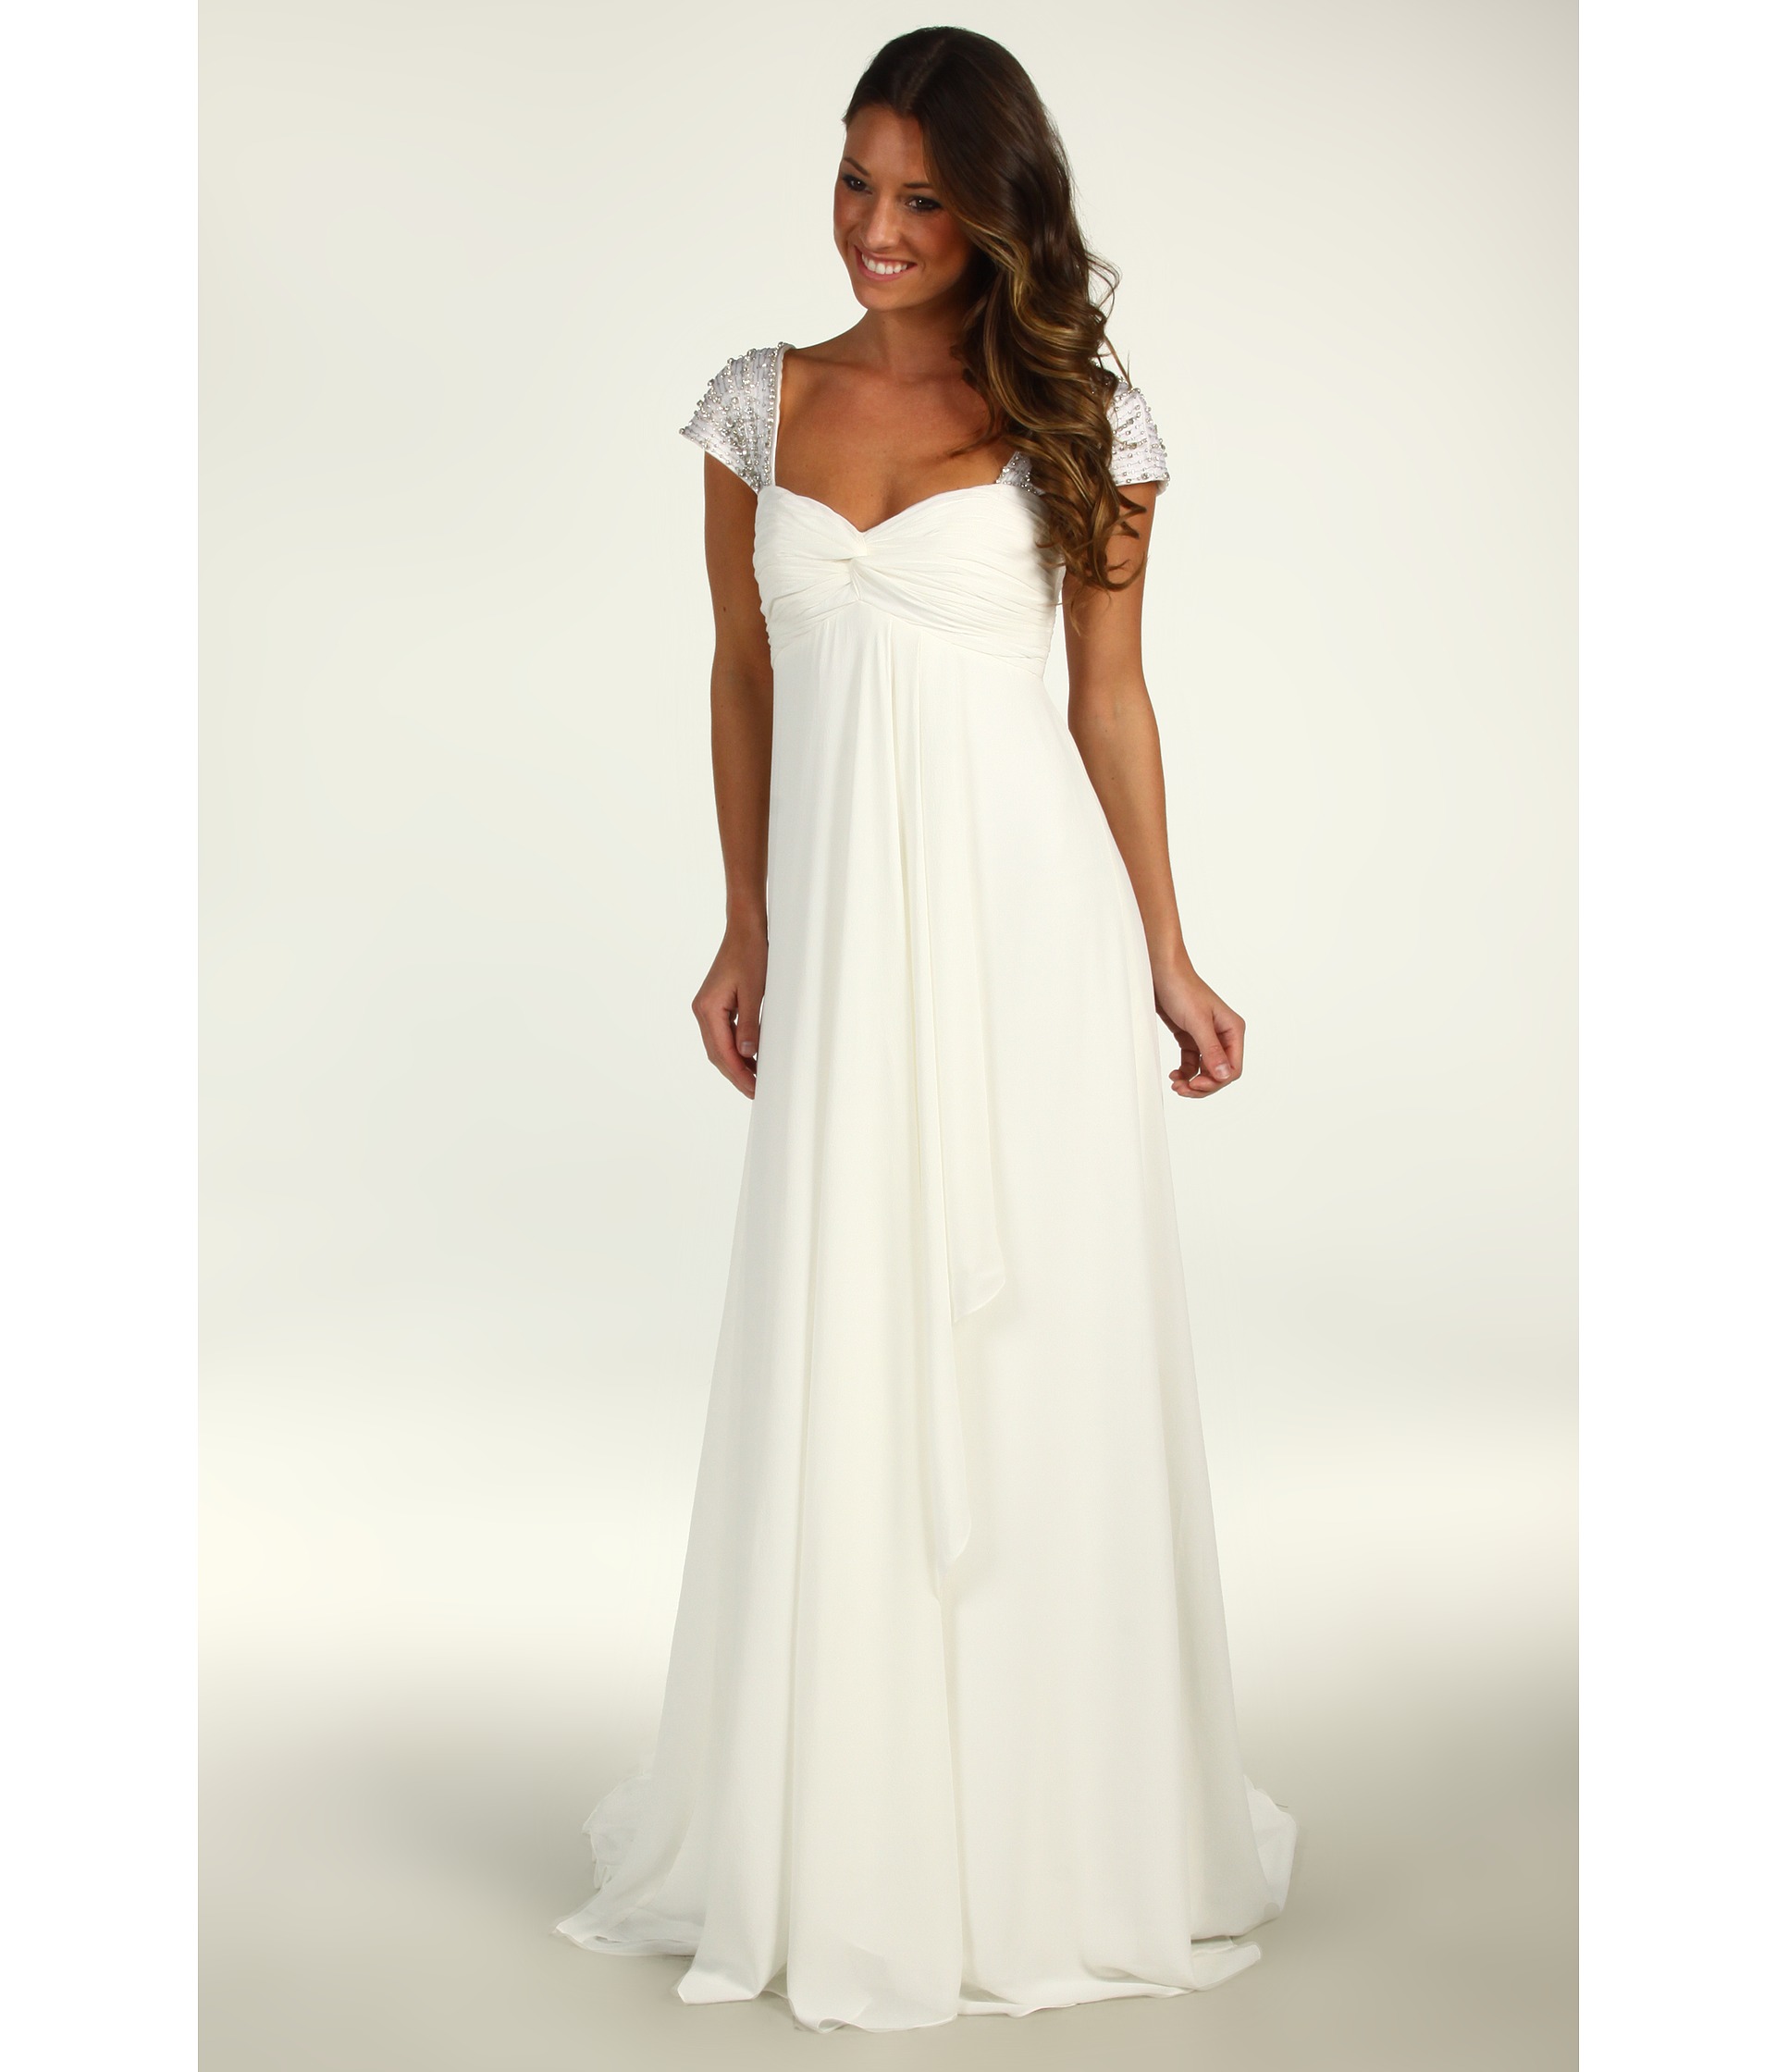 Nicole Miller Chiffon Gown With Embellished Cap Sleeves $1,695.00 